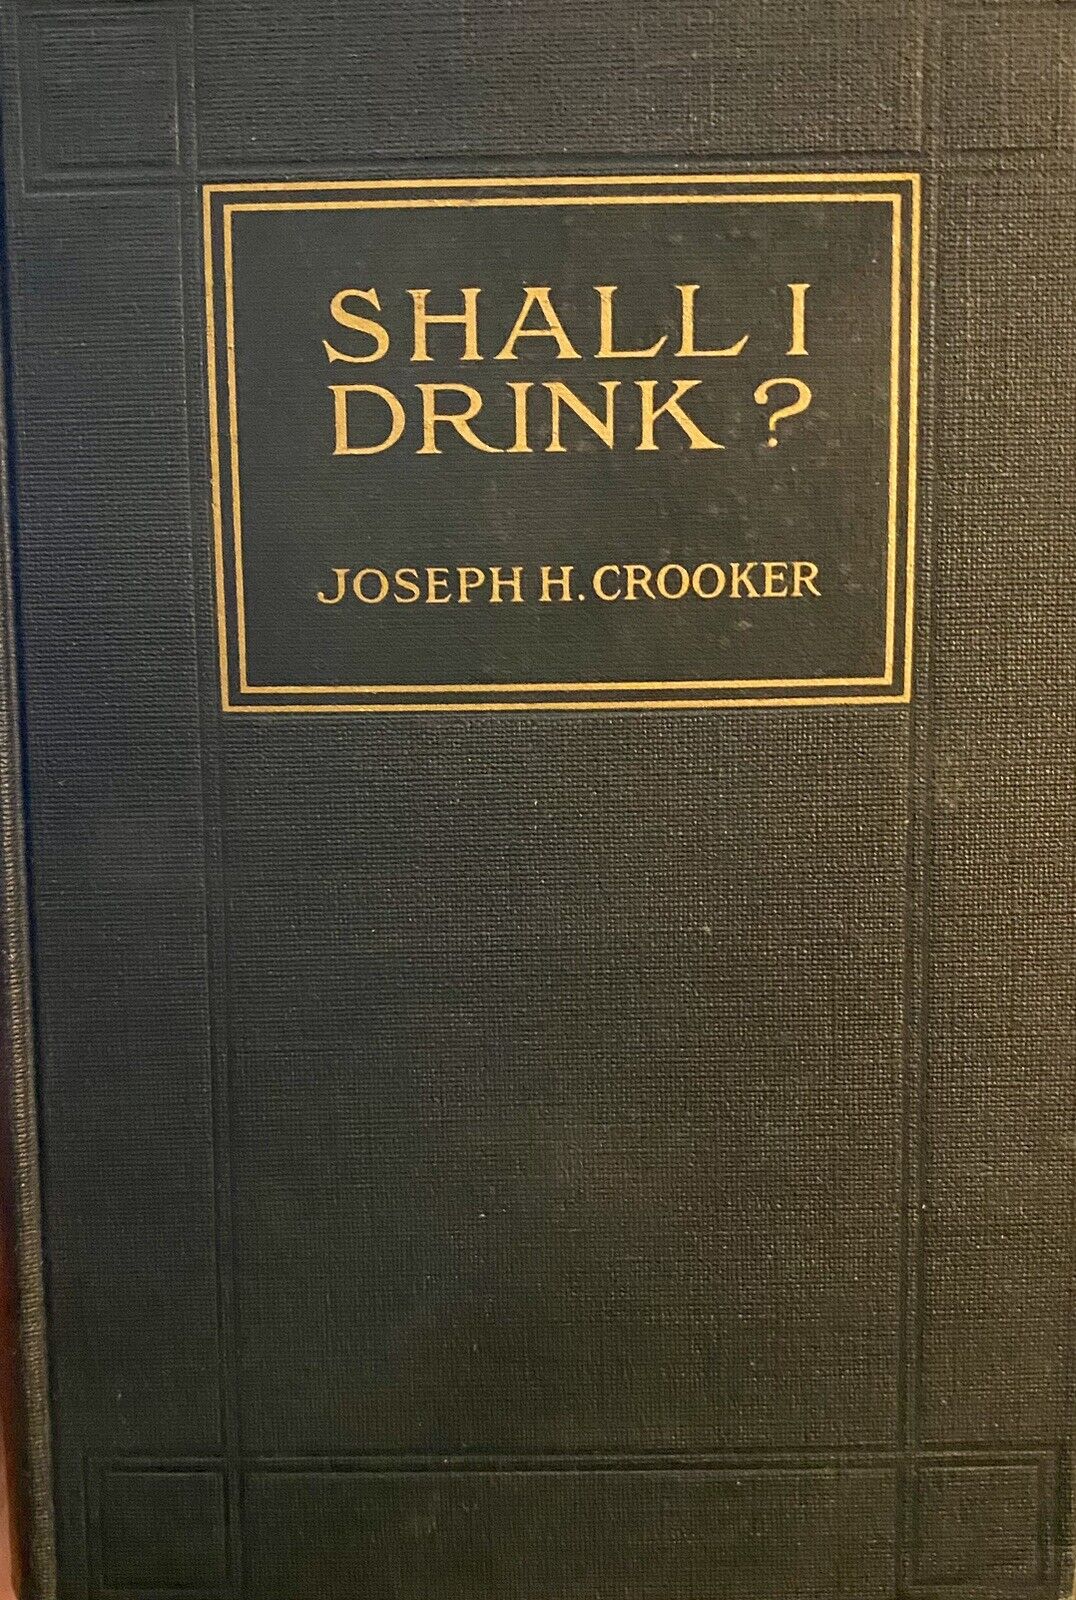 SHALL I DRINK? By Joseph Henry Crooker Rare, Signed.  1914 Edition